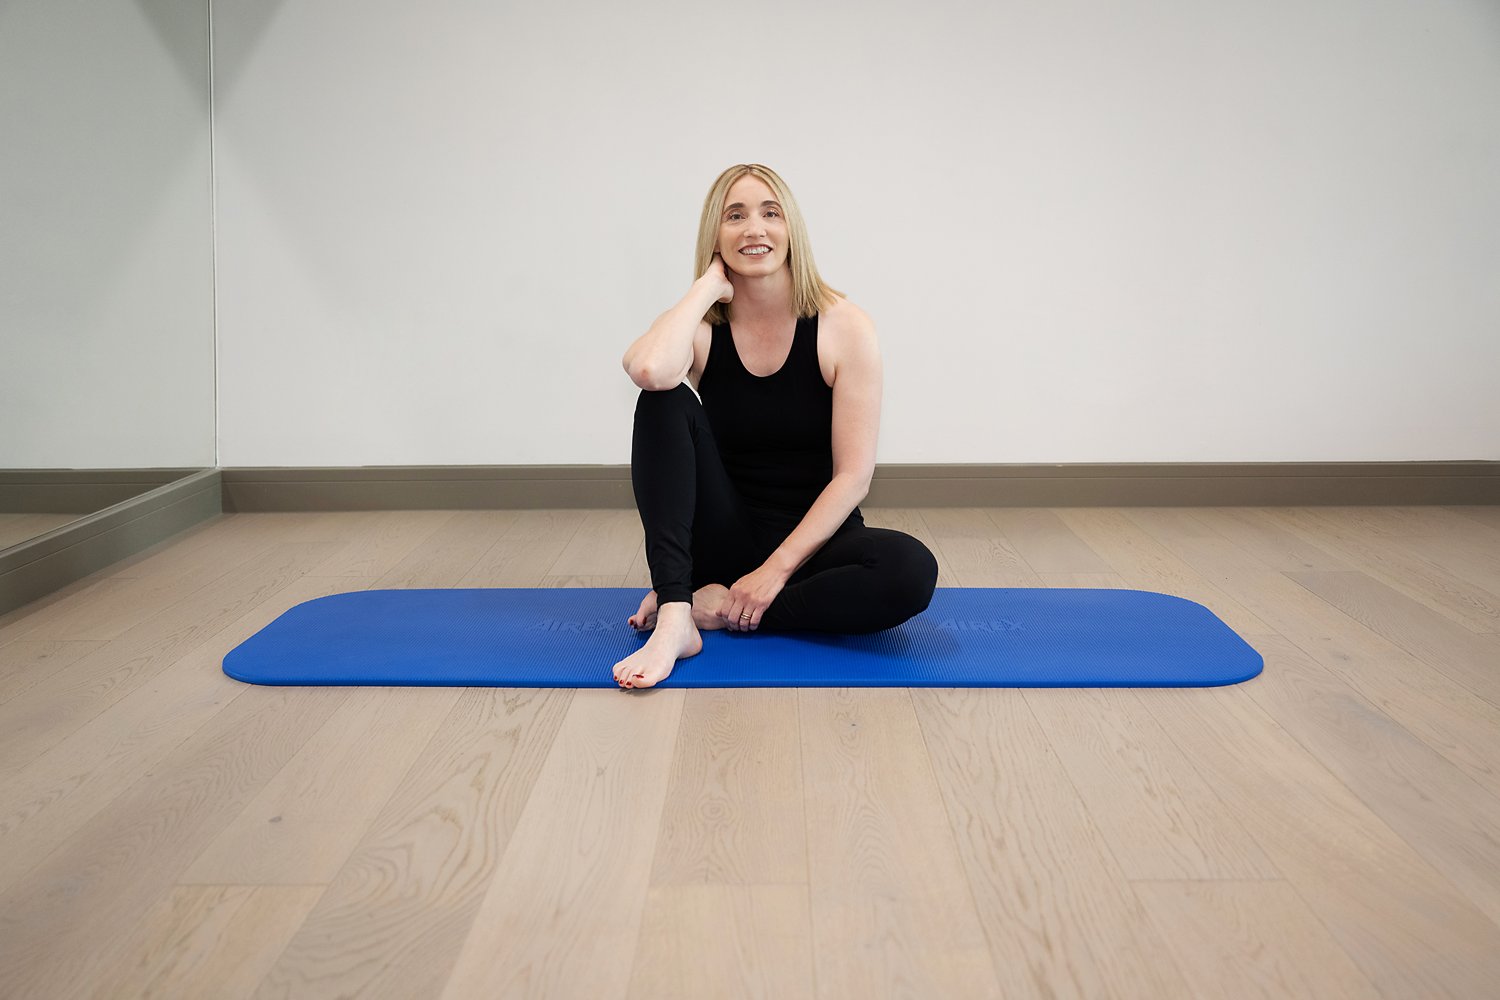 A woman with long blonde hair and a black workout outfit sits on a blue yoga mat. 